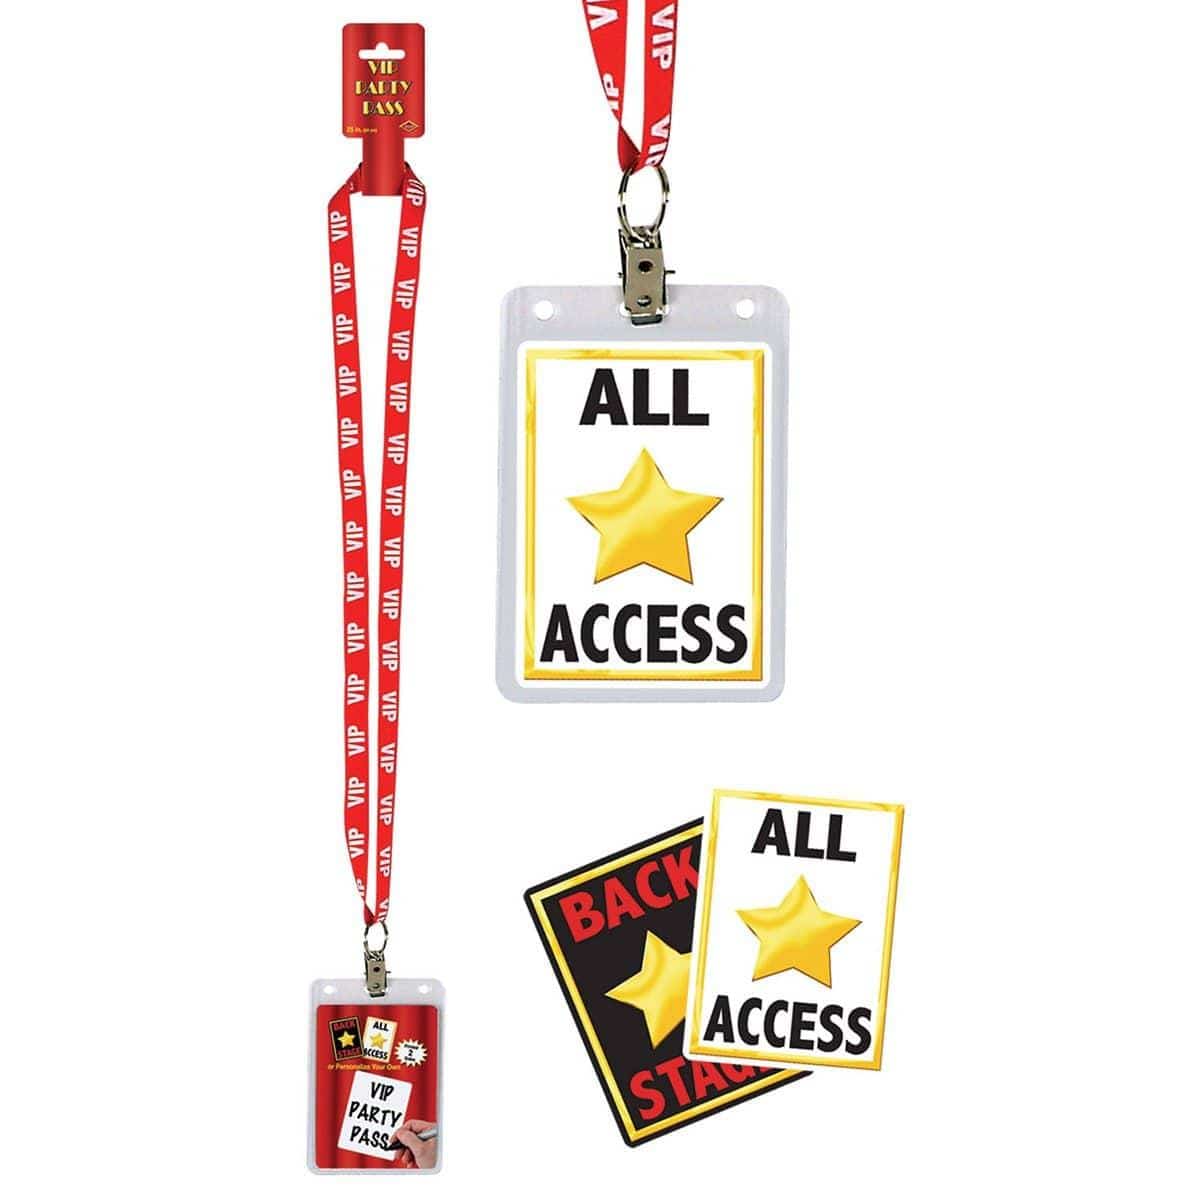 Buy Theme Party Hollywood Vip Party Pass, 25 Inches sold at Party Expert